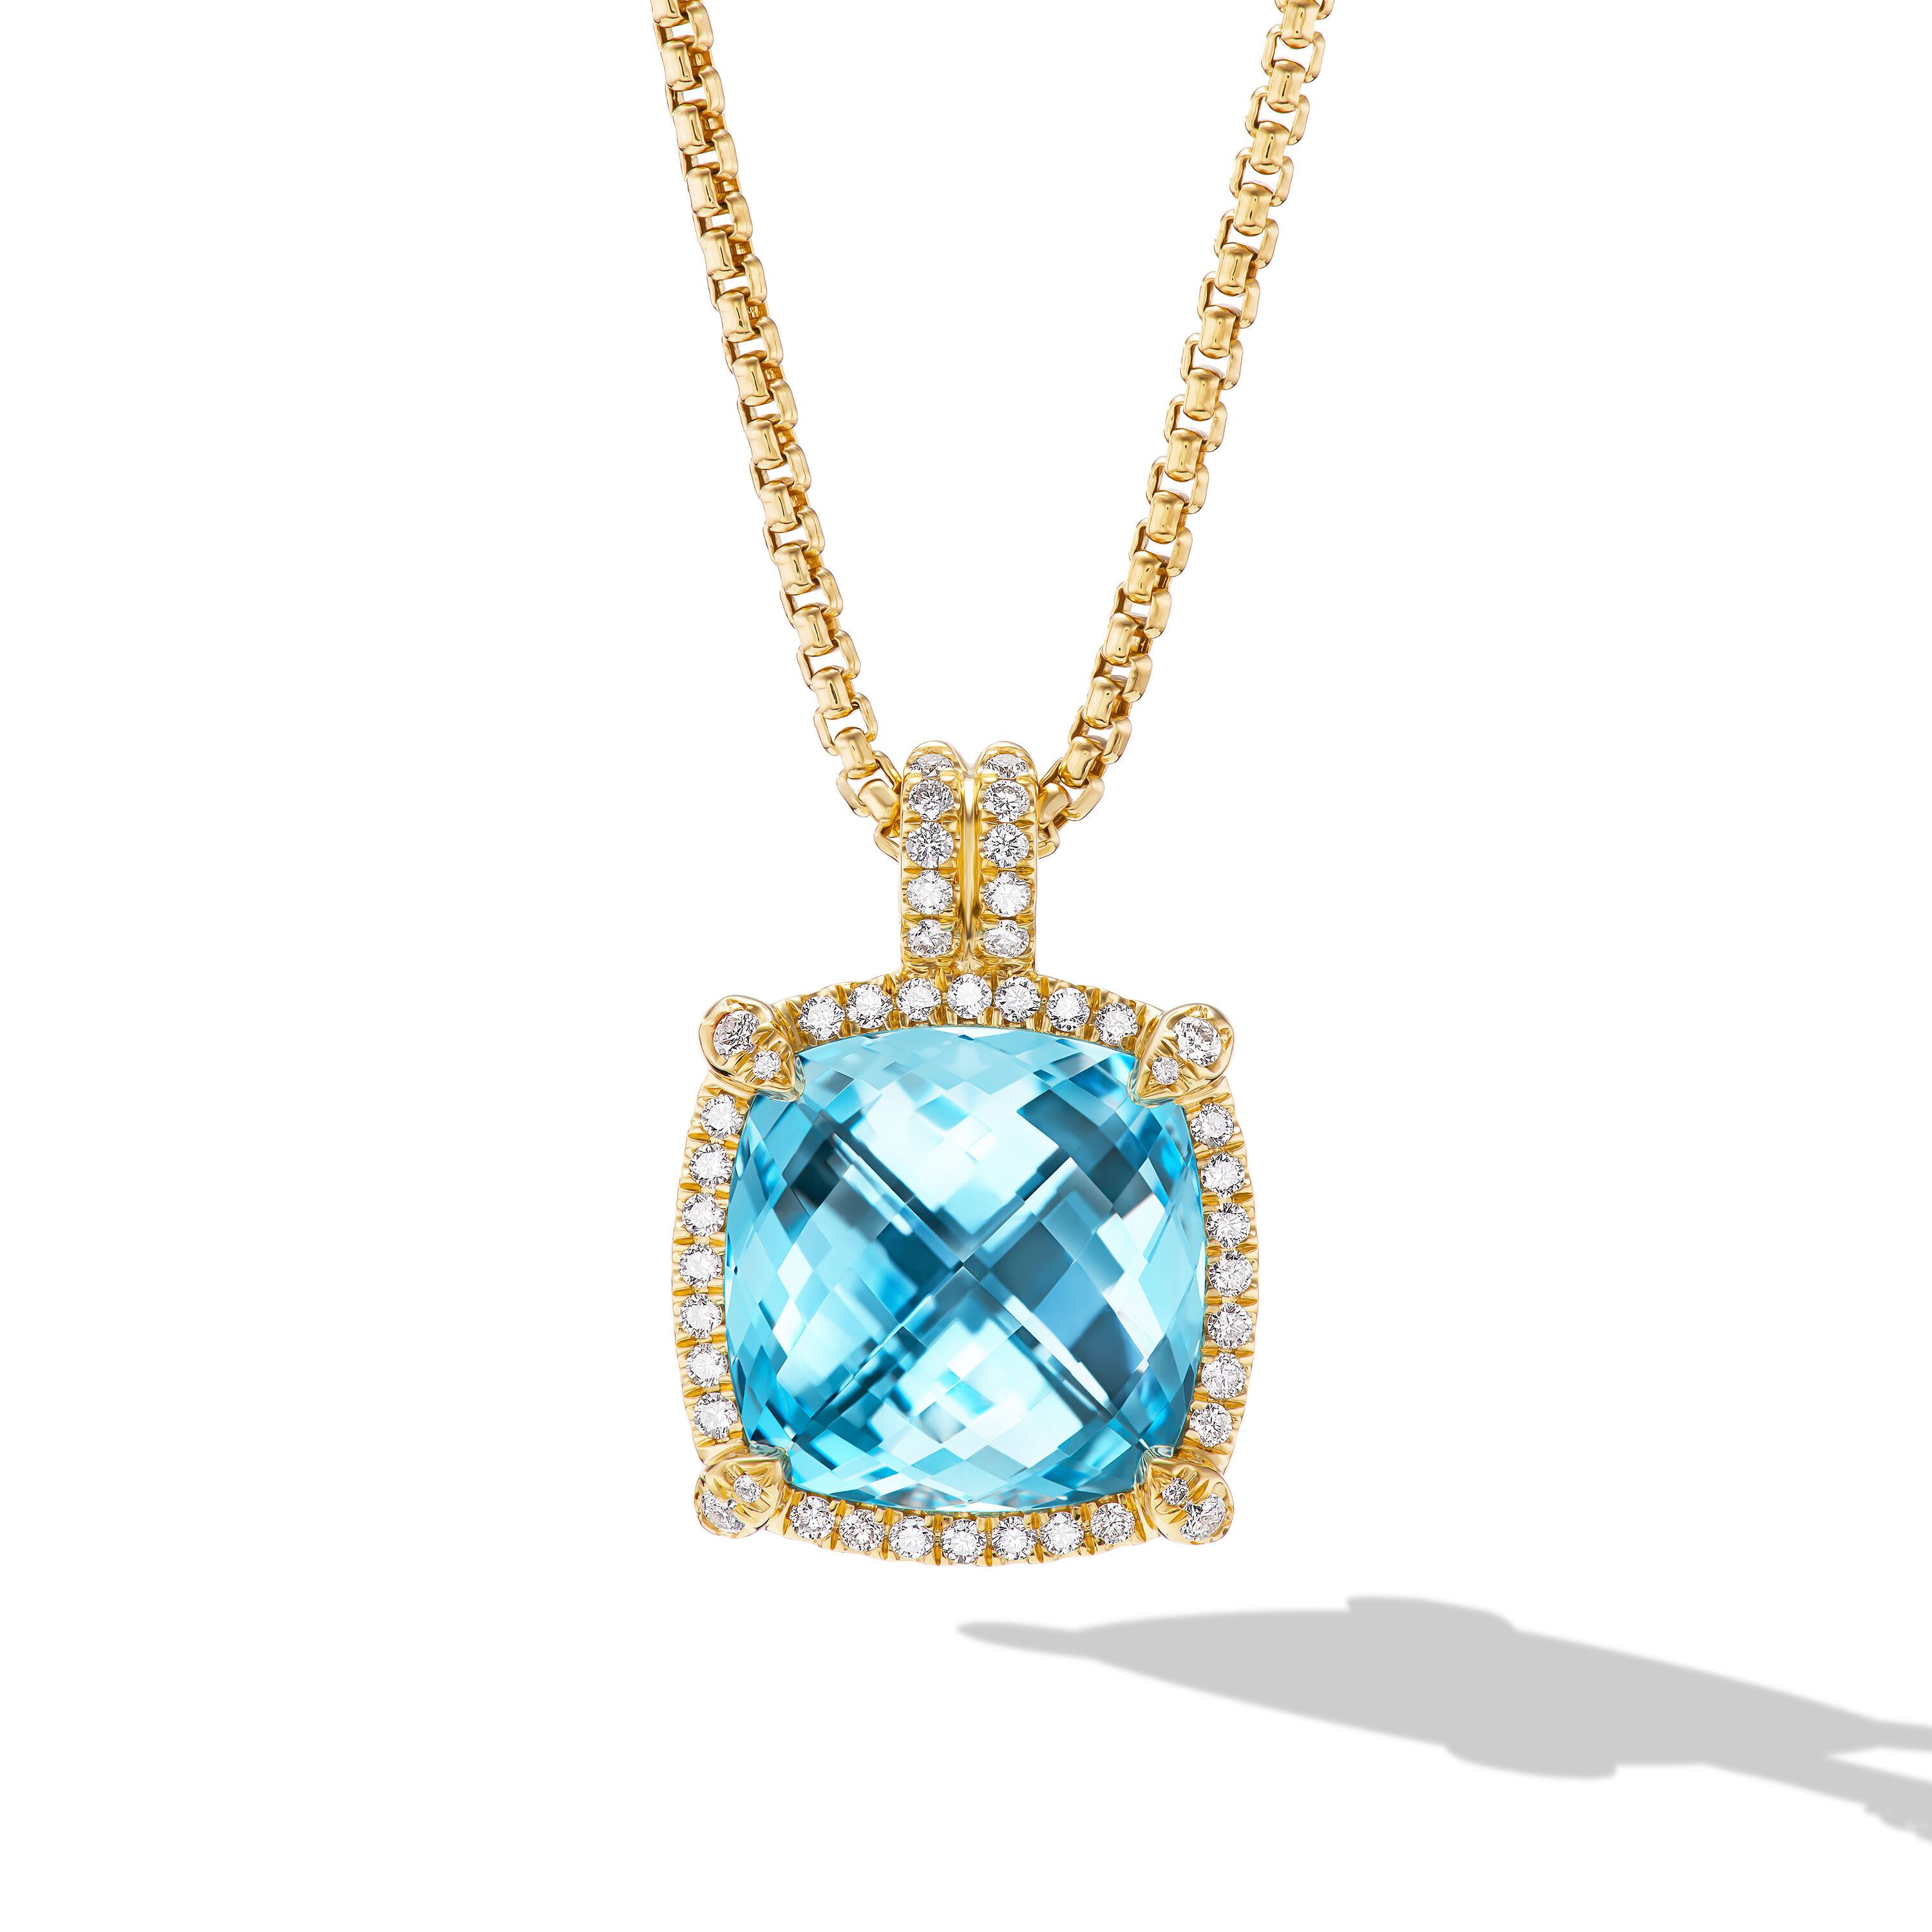 David Yurman Chatelaine Pave Bezel Pendant Necklace in 18K Yellow Gold with Blue Topaz and Diamonds